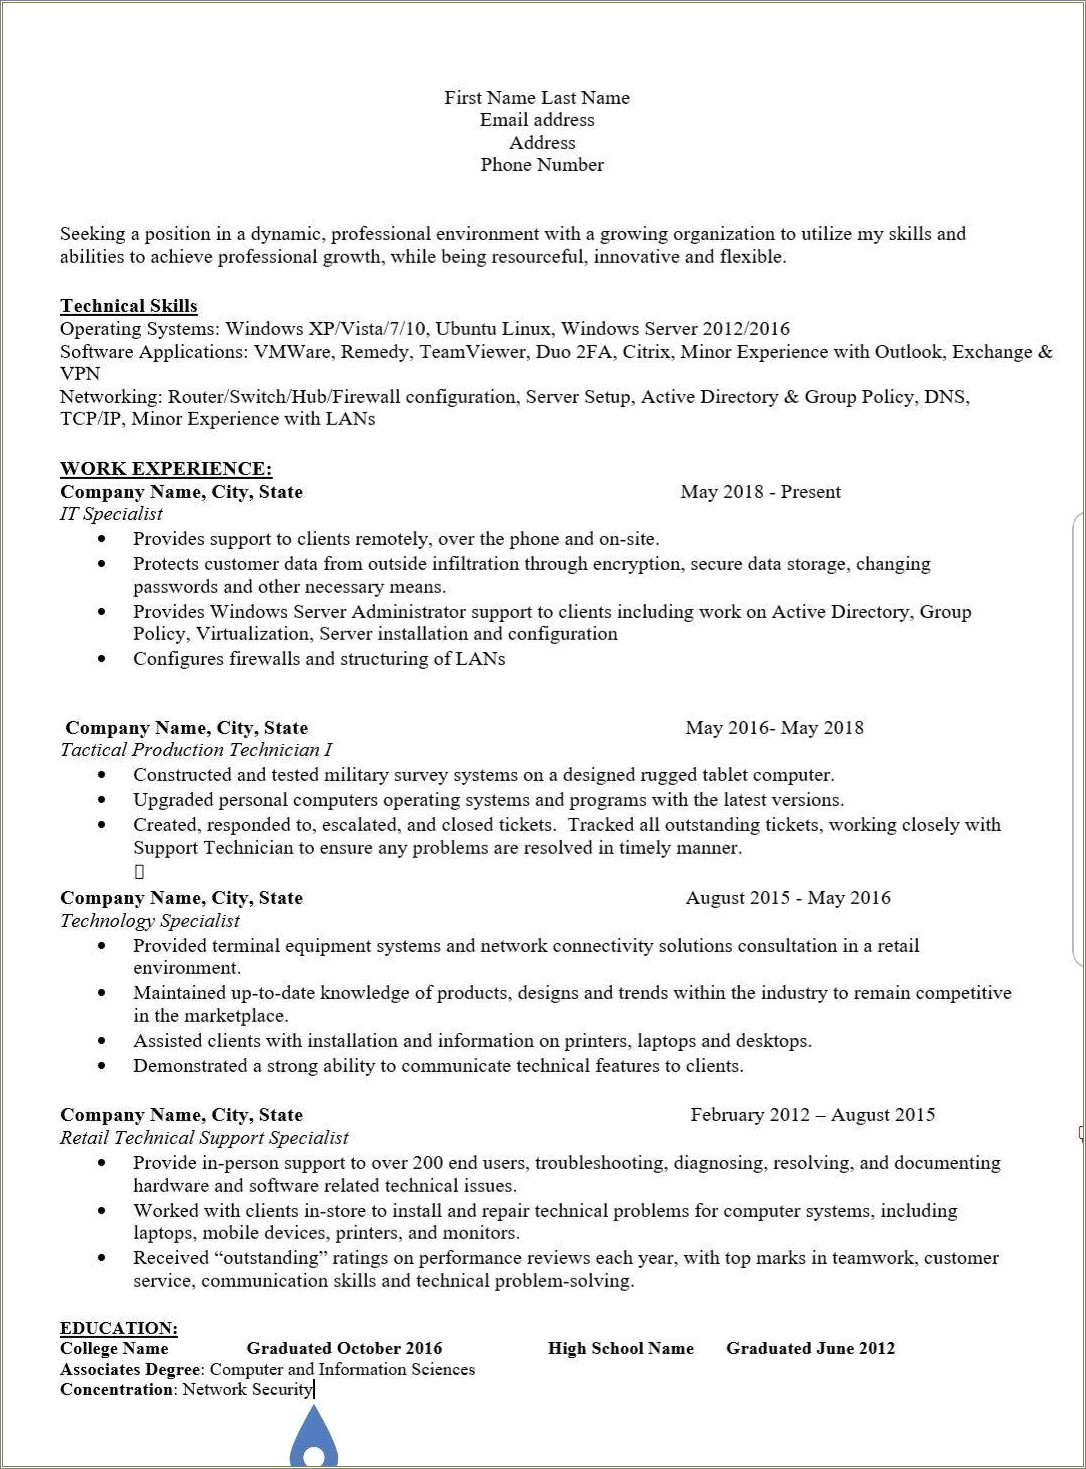 Listing Minor Experience With An Os On Resume